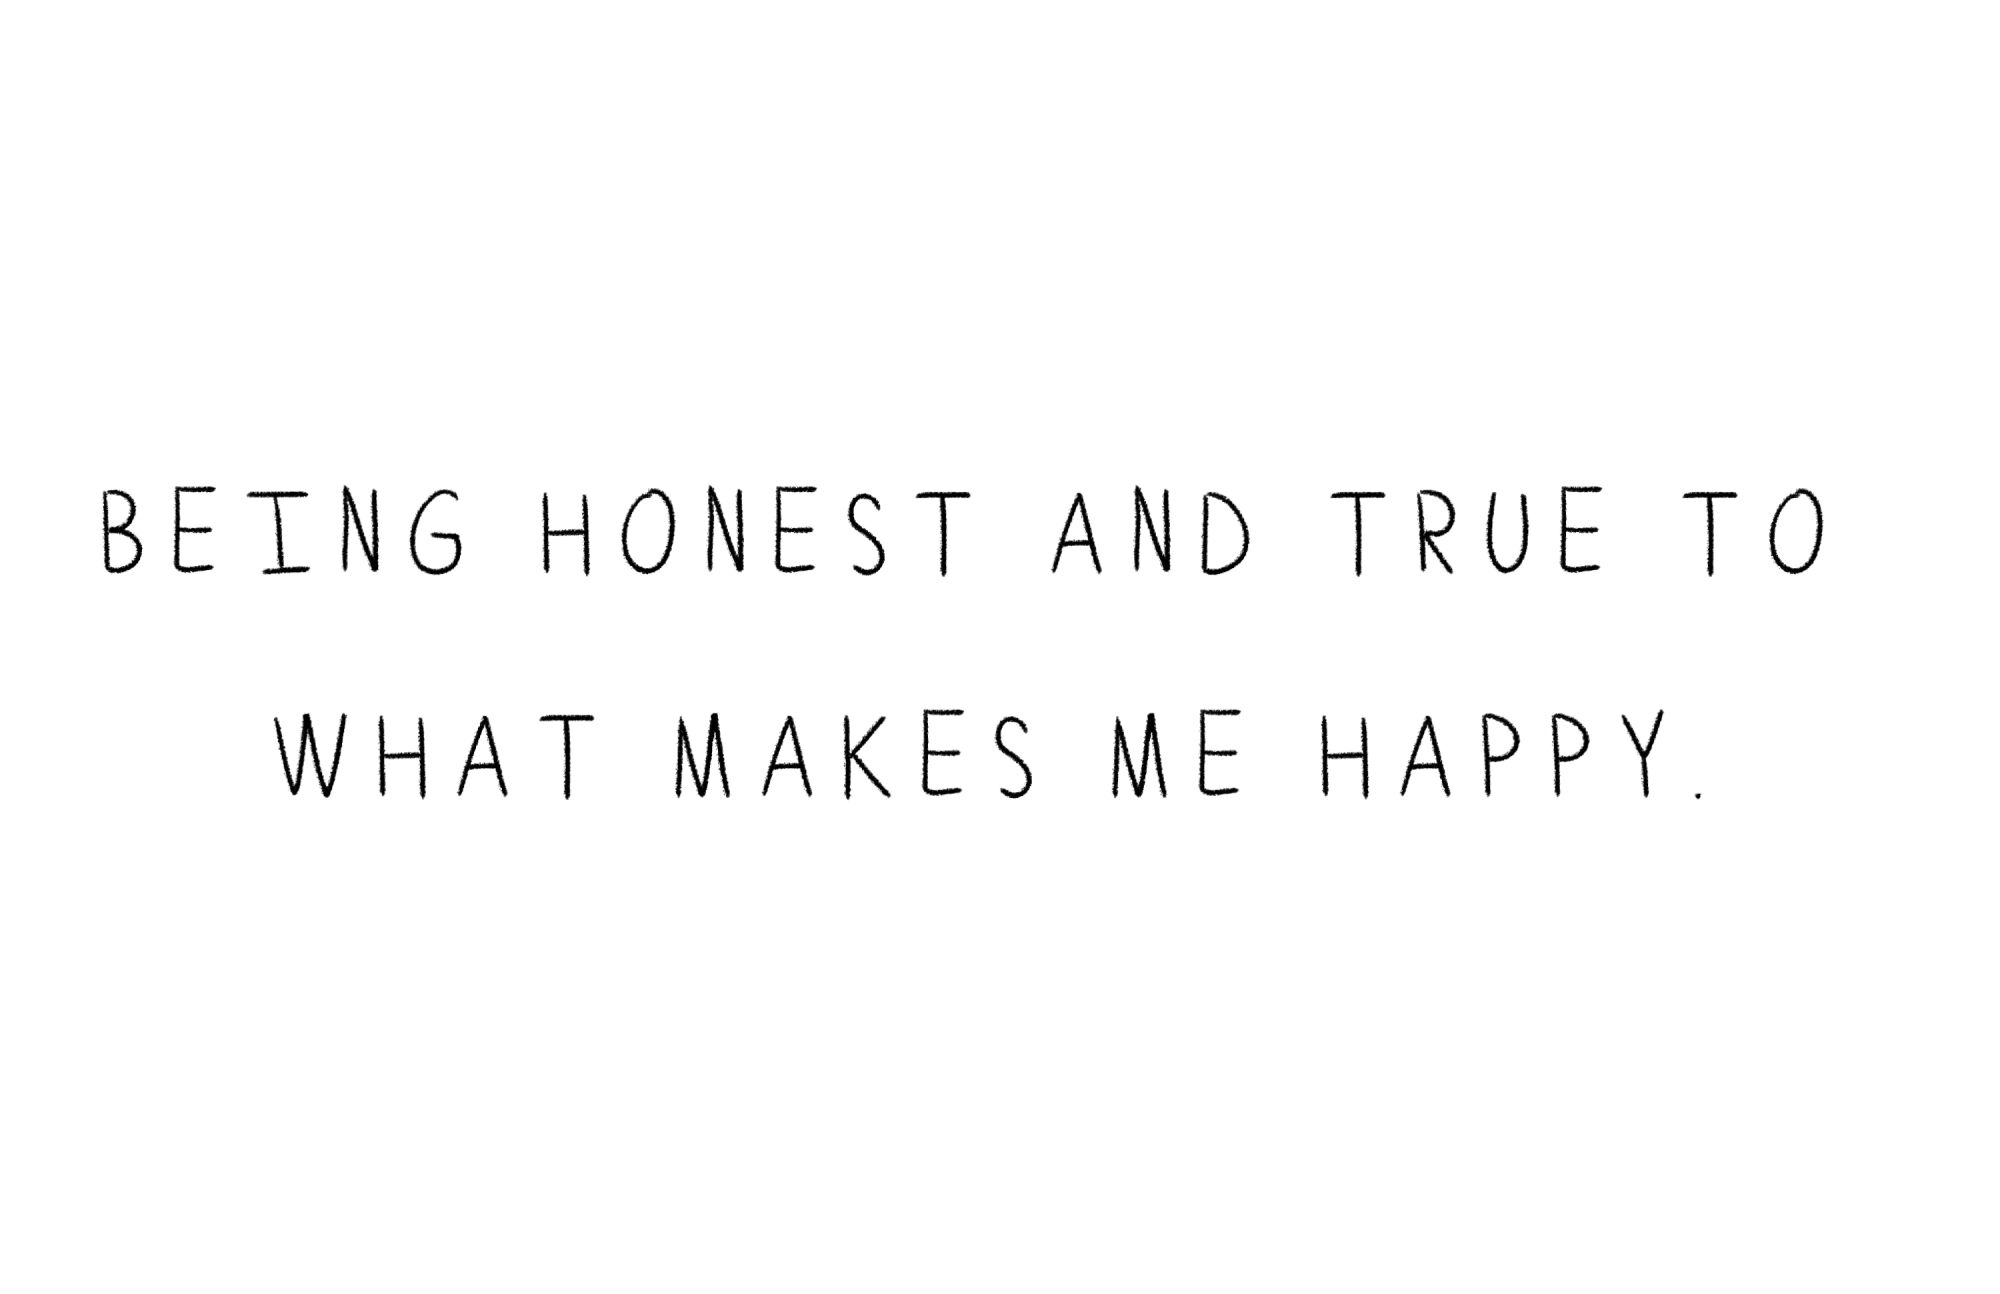 Quote "being honest and true to what makes me happy/"